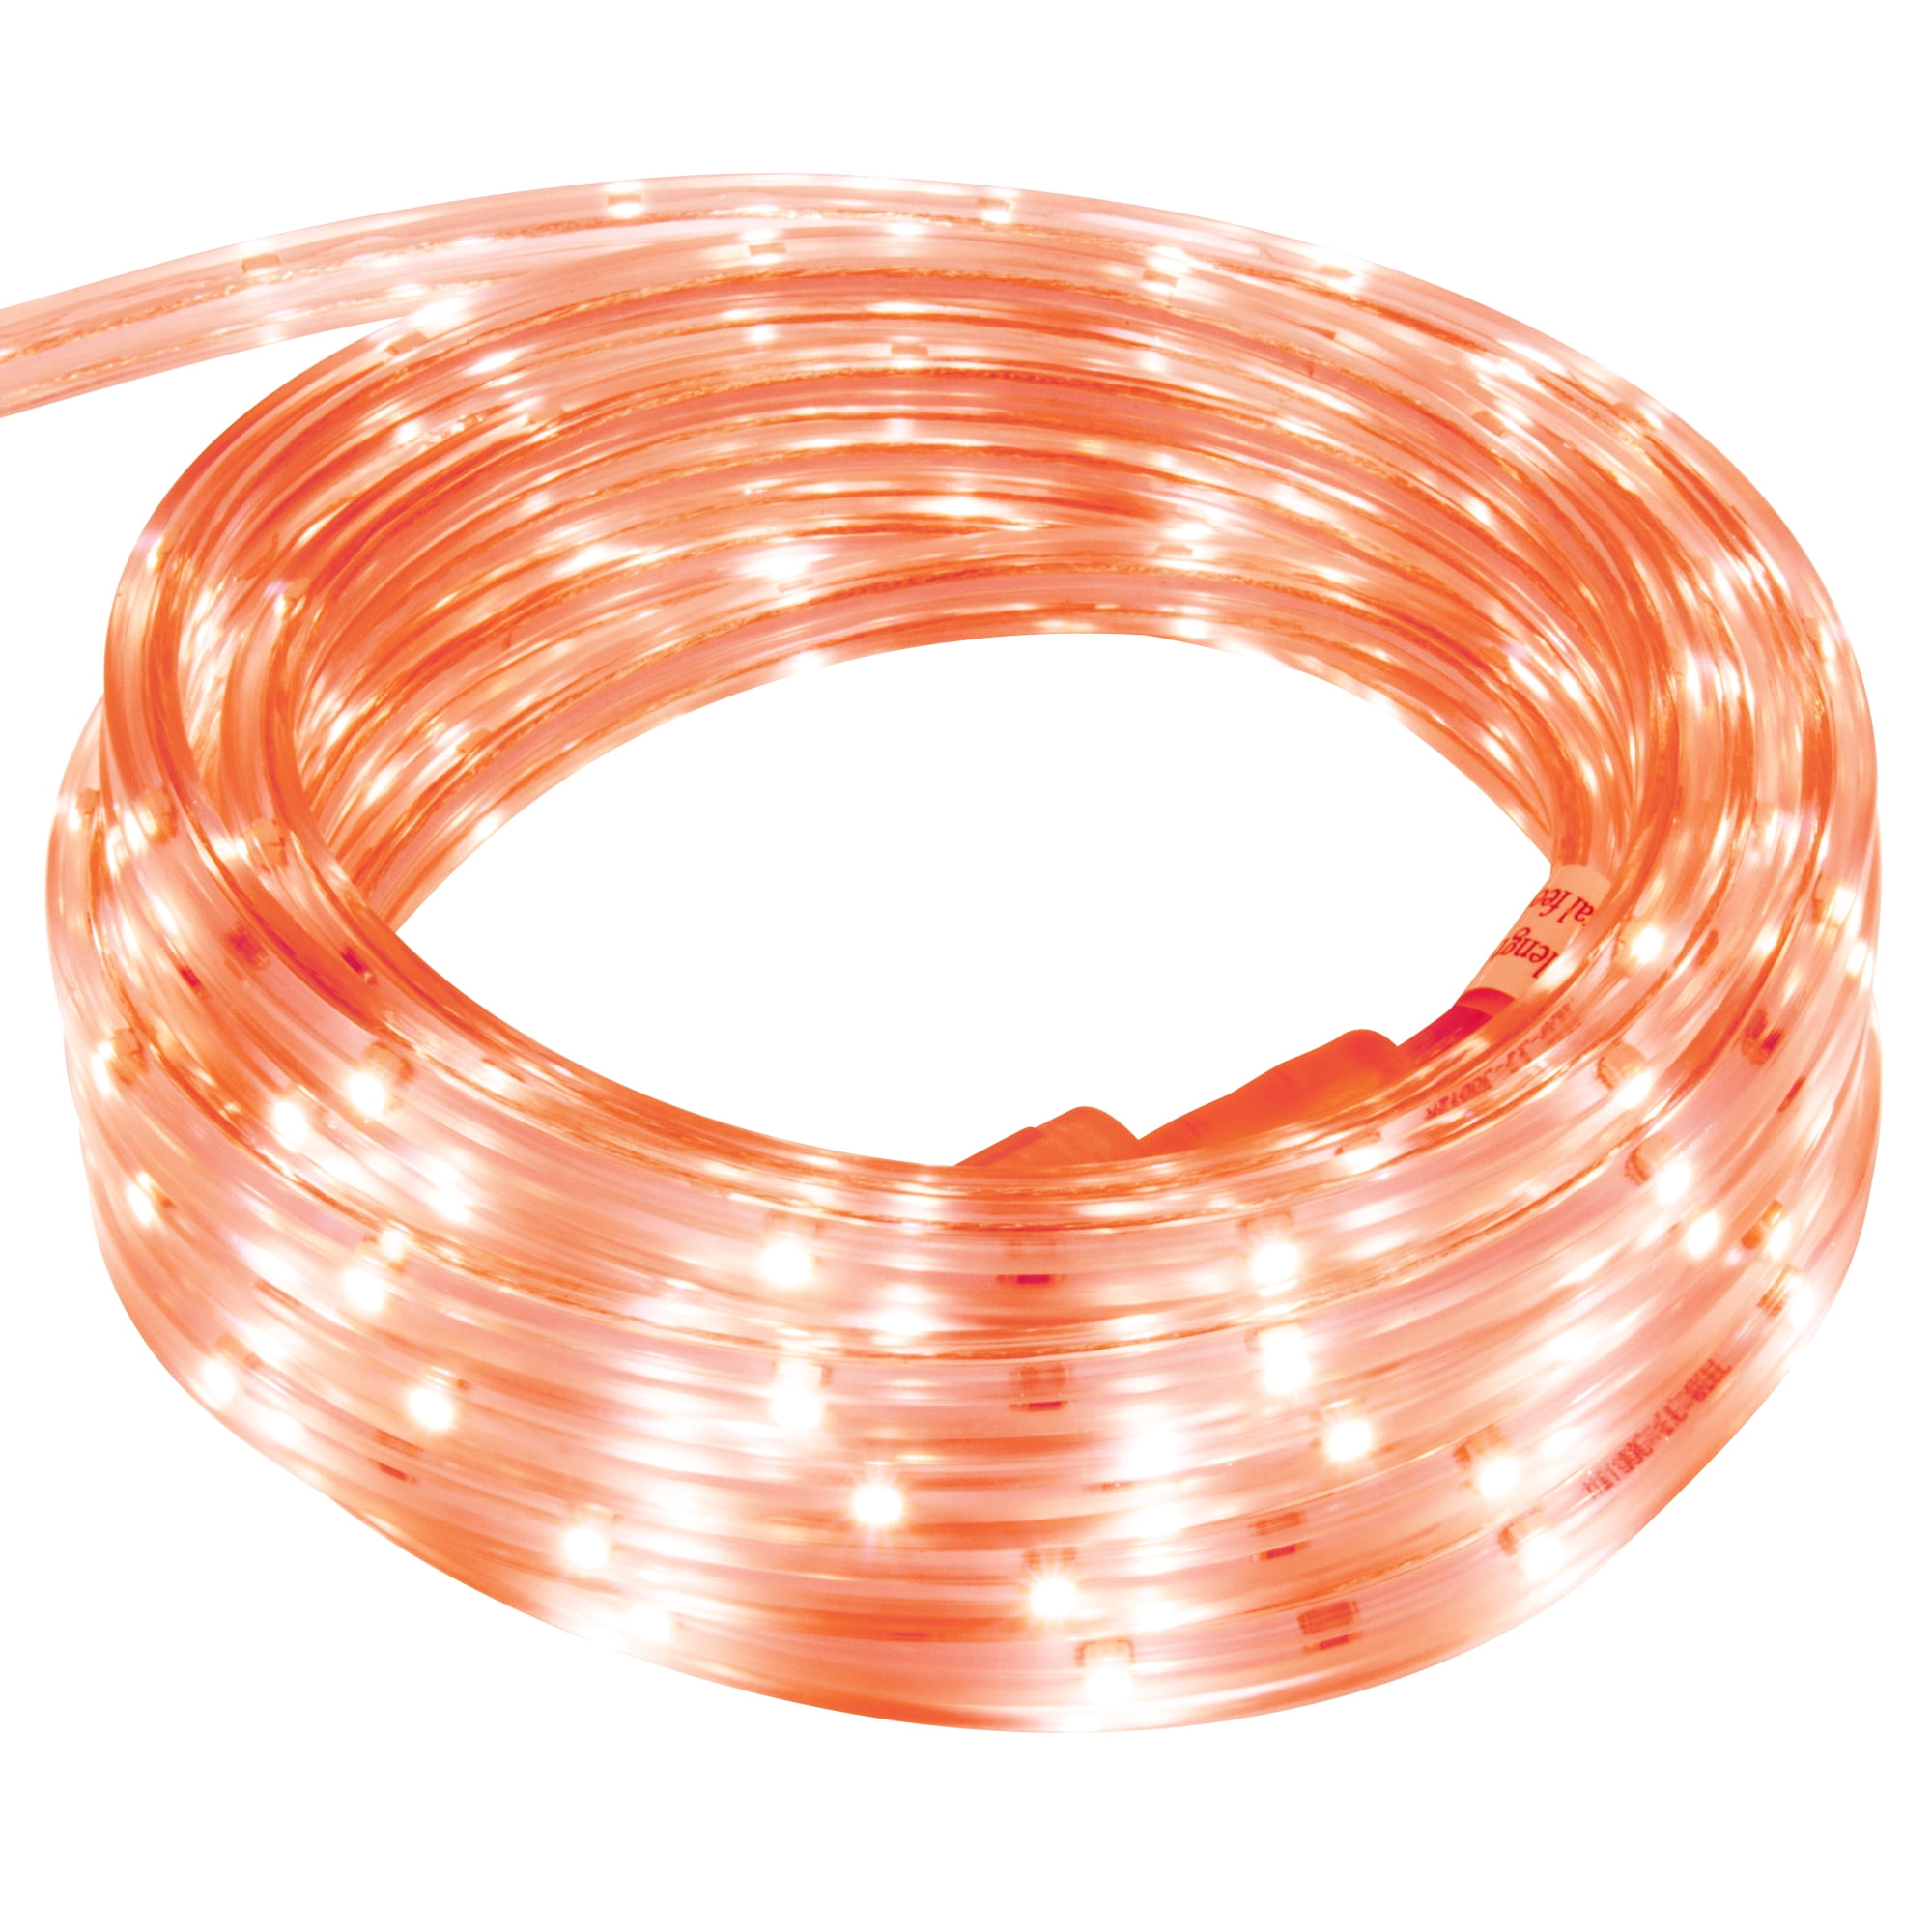 Choice of Colours Led Tubular Rope Lighting Garden Home Static/Sequence